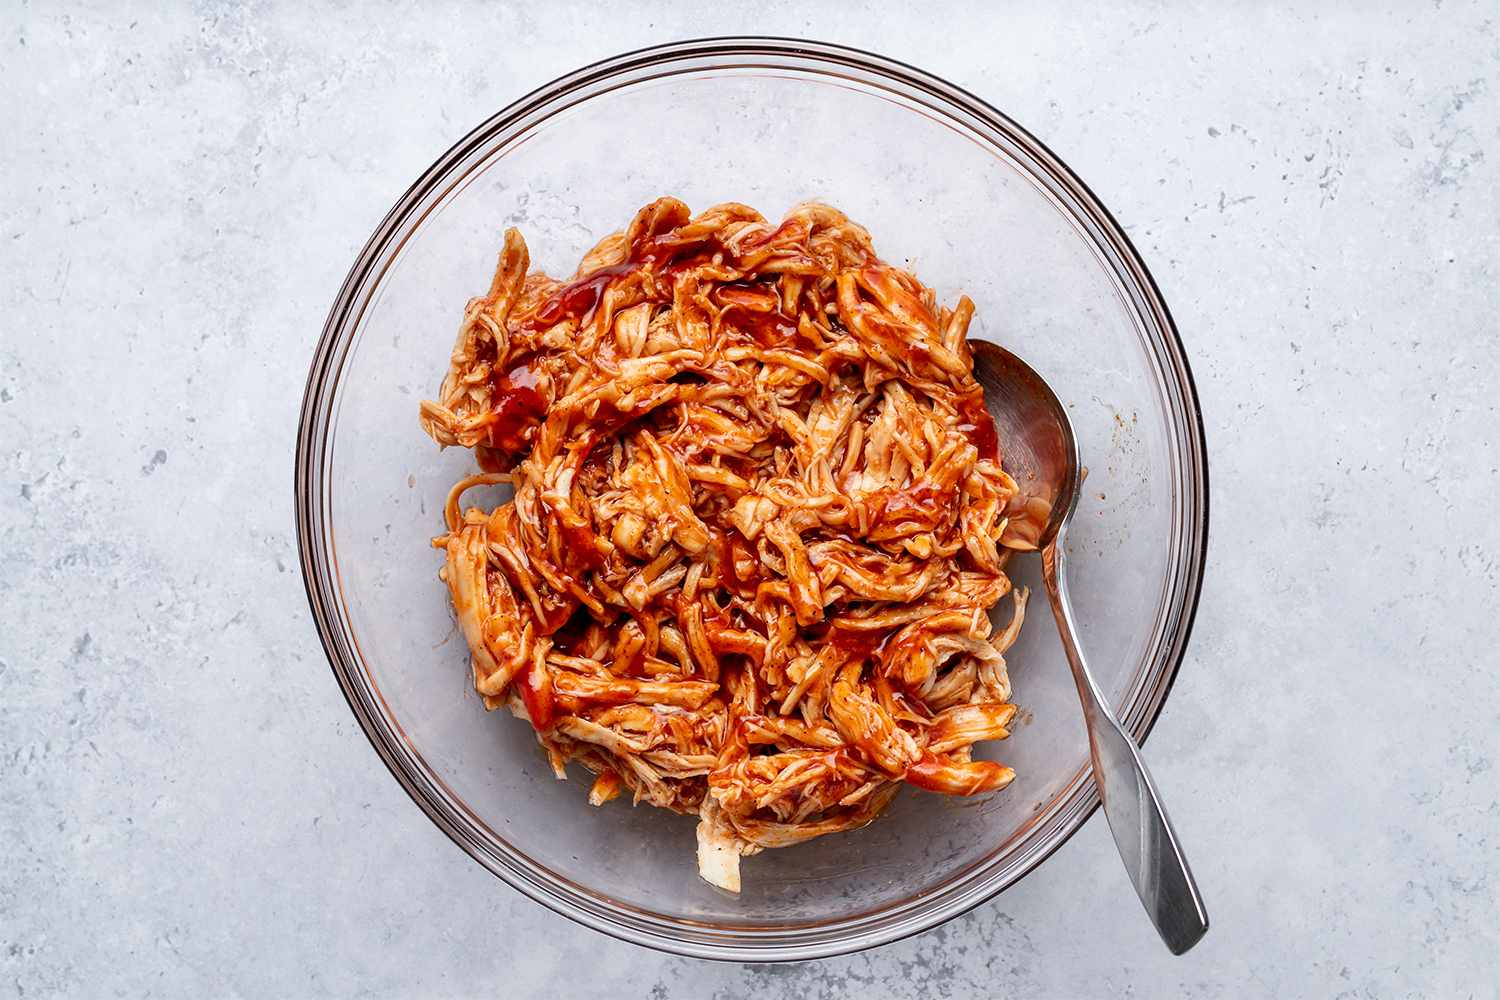 Shredded chicken tossed in barbecue sauce